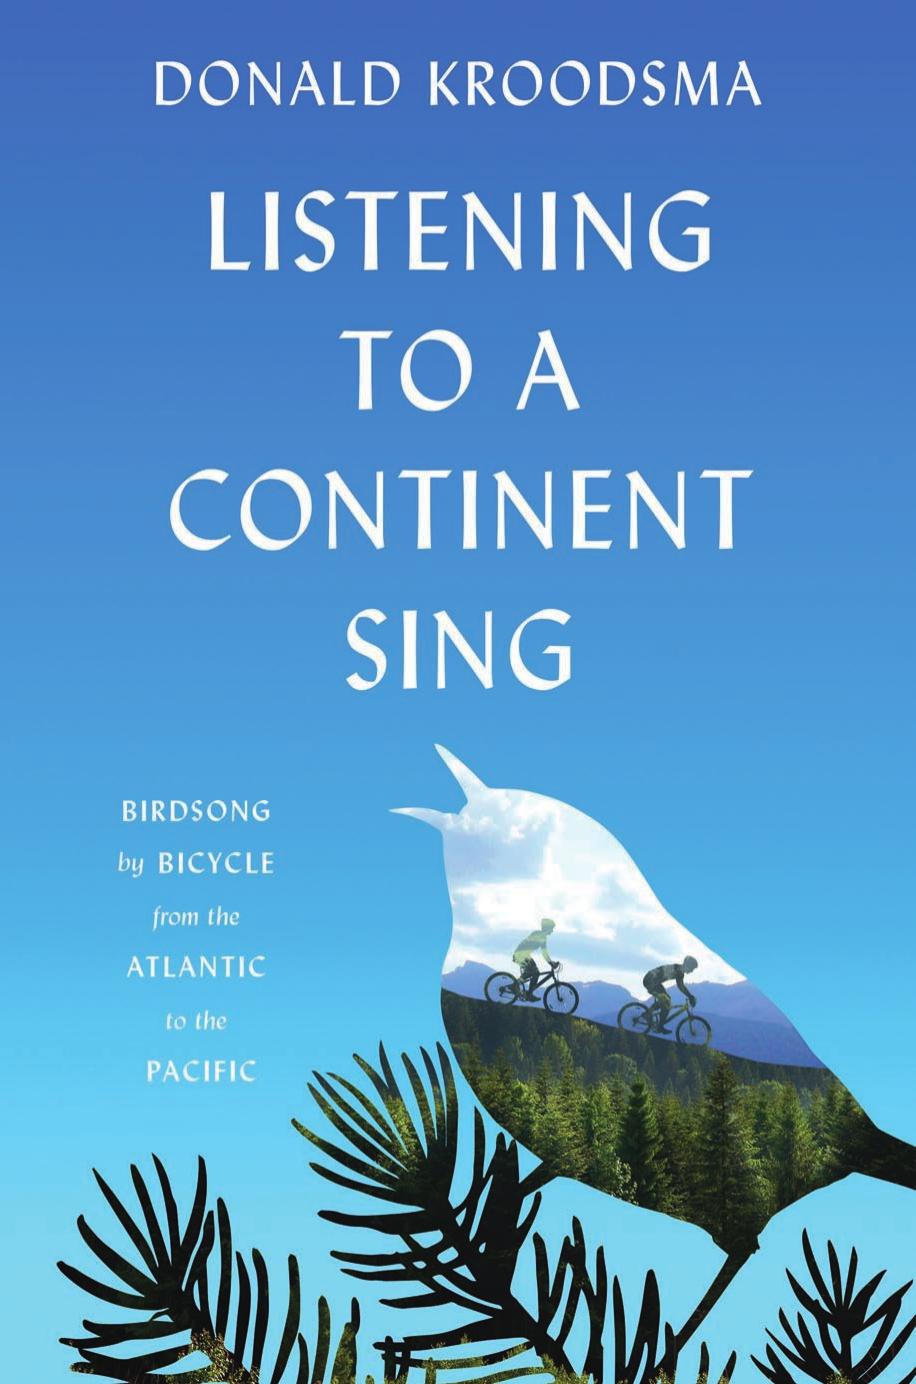 Listening to a Continent Sing by Donald Kroodsma